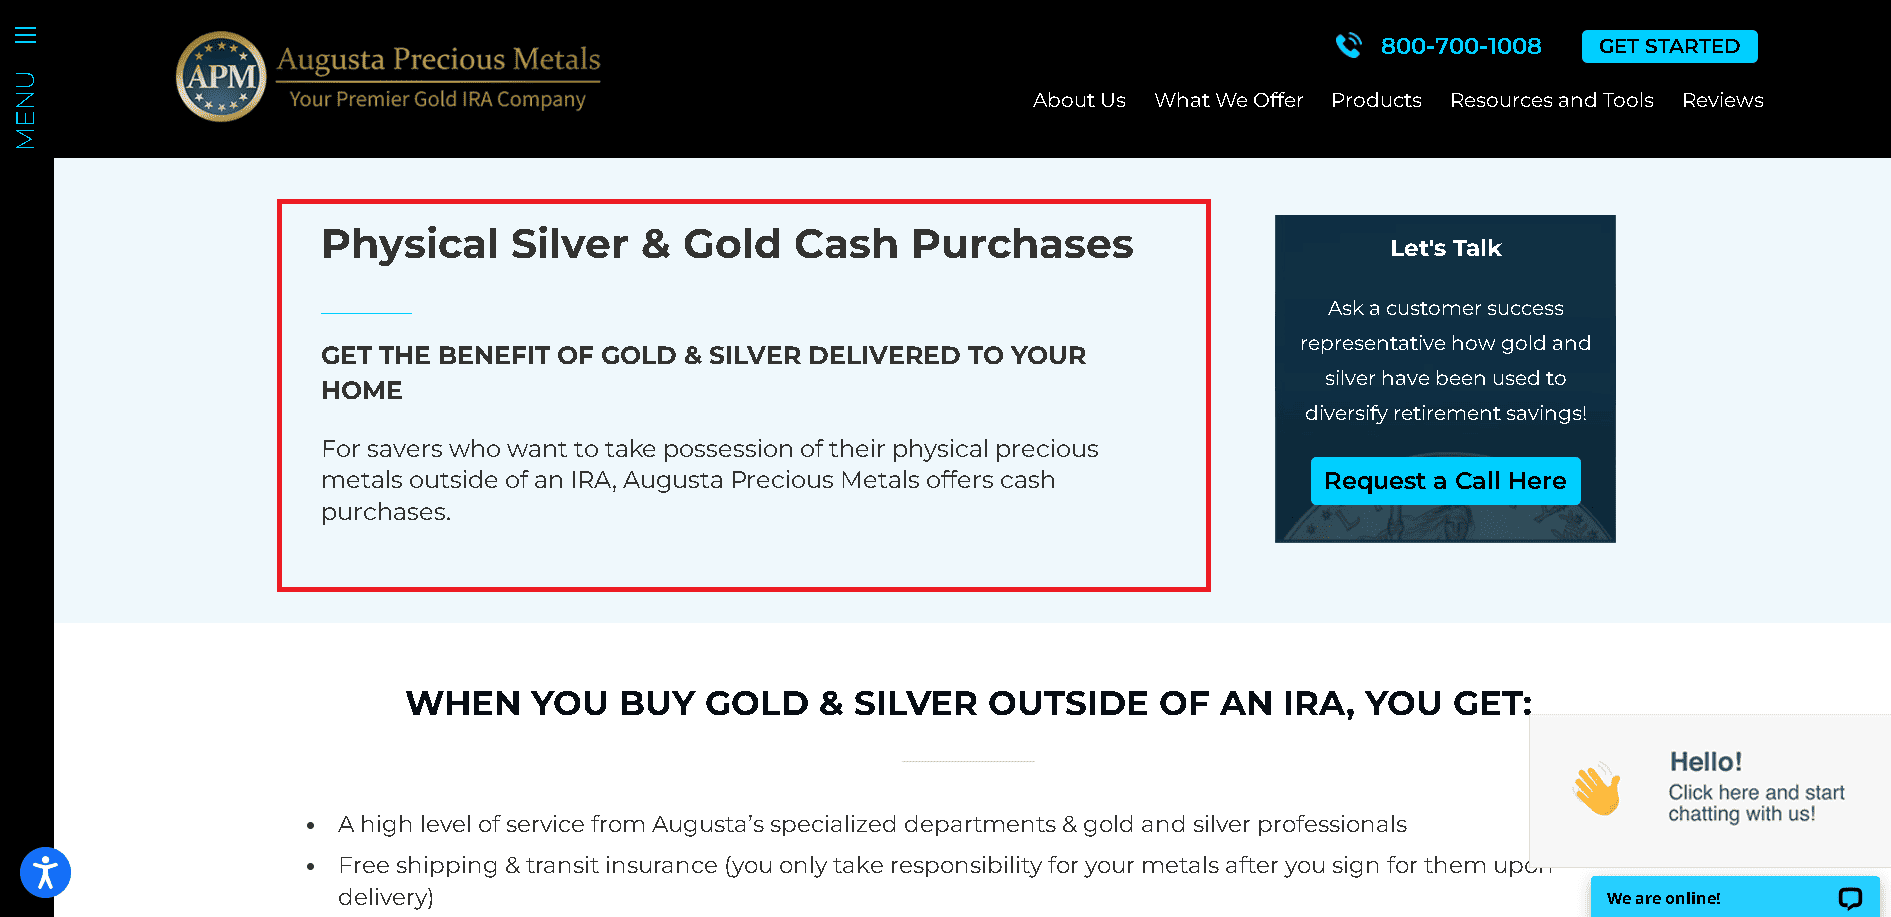 Augusta Precious Metals pro- they let you buy gold and silver for cash